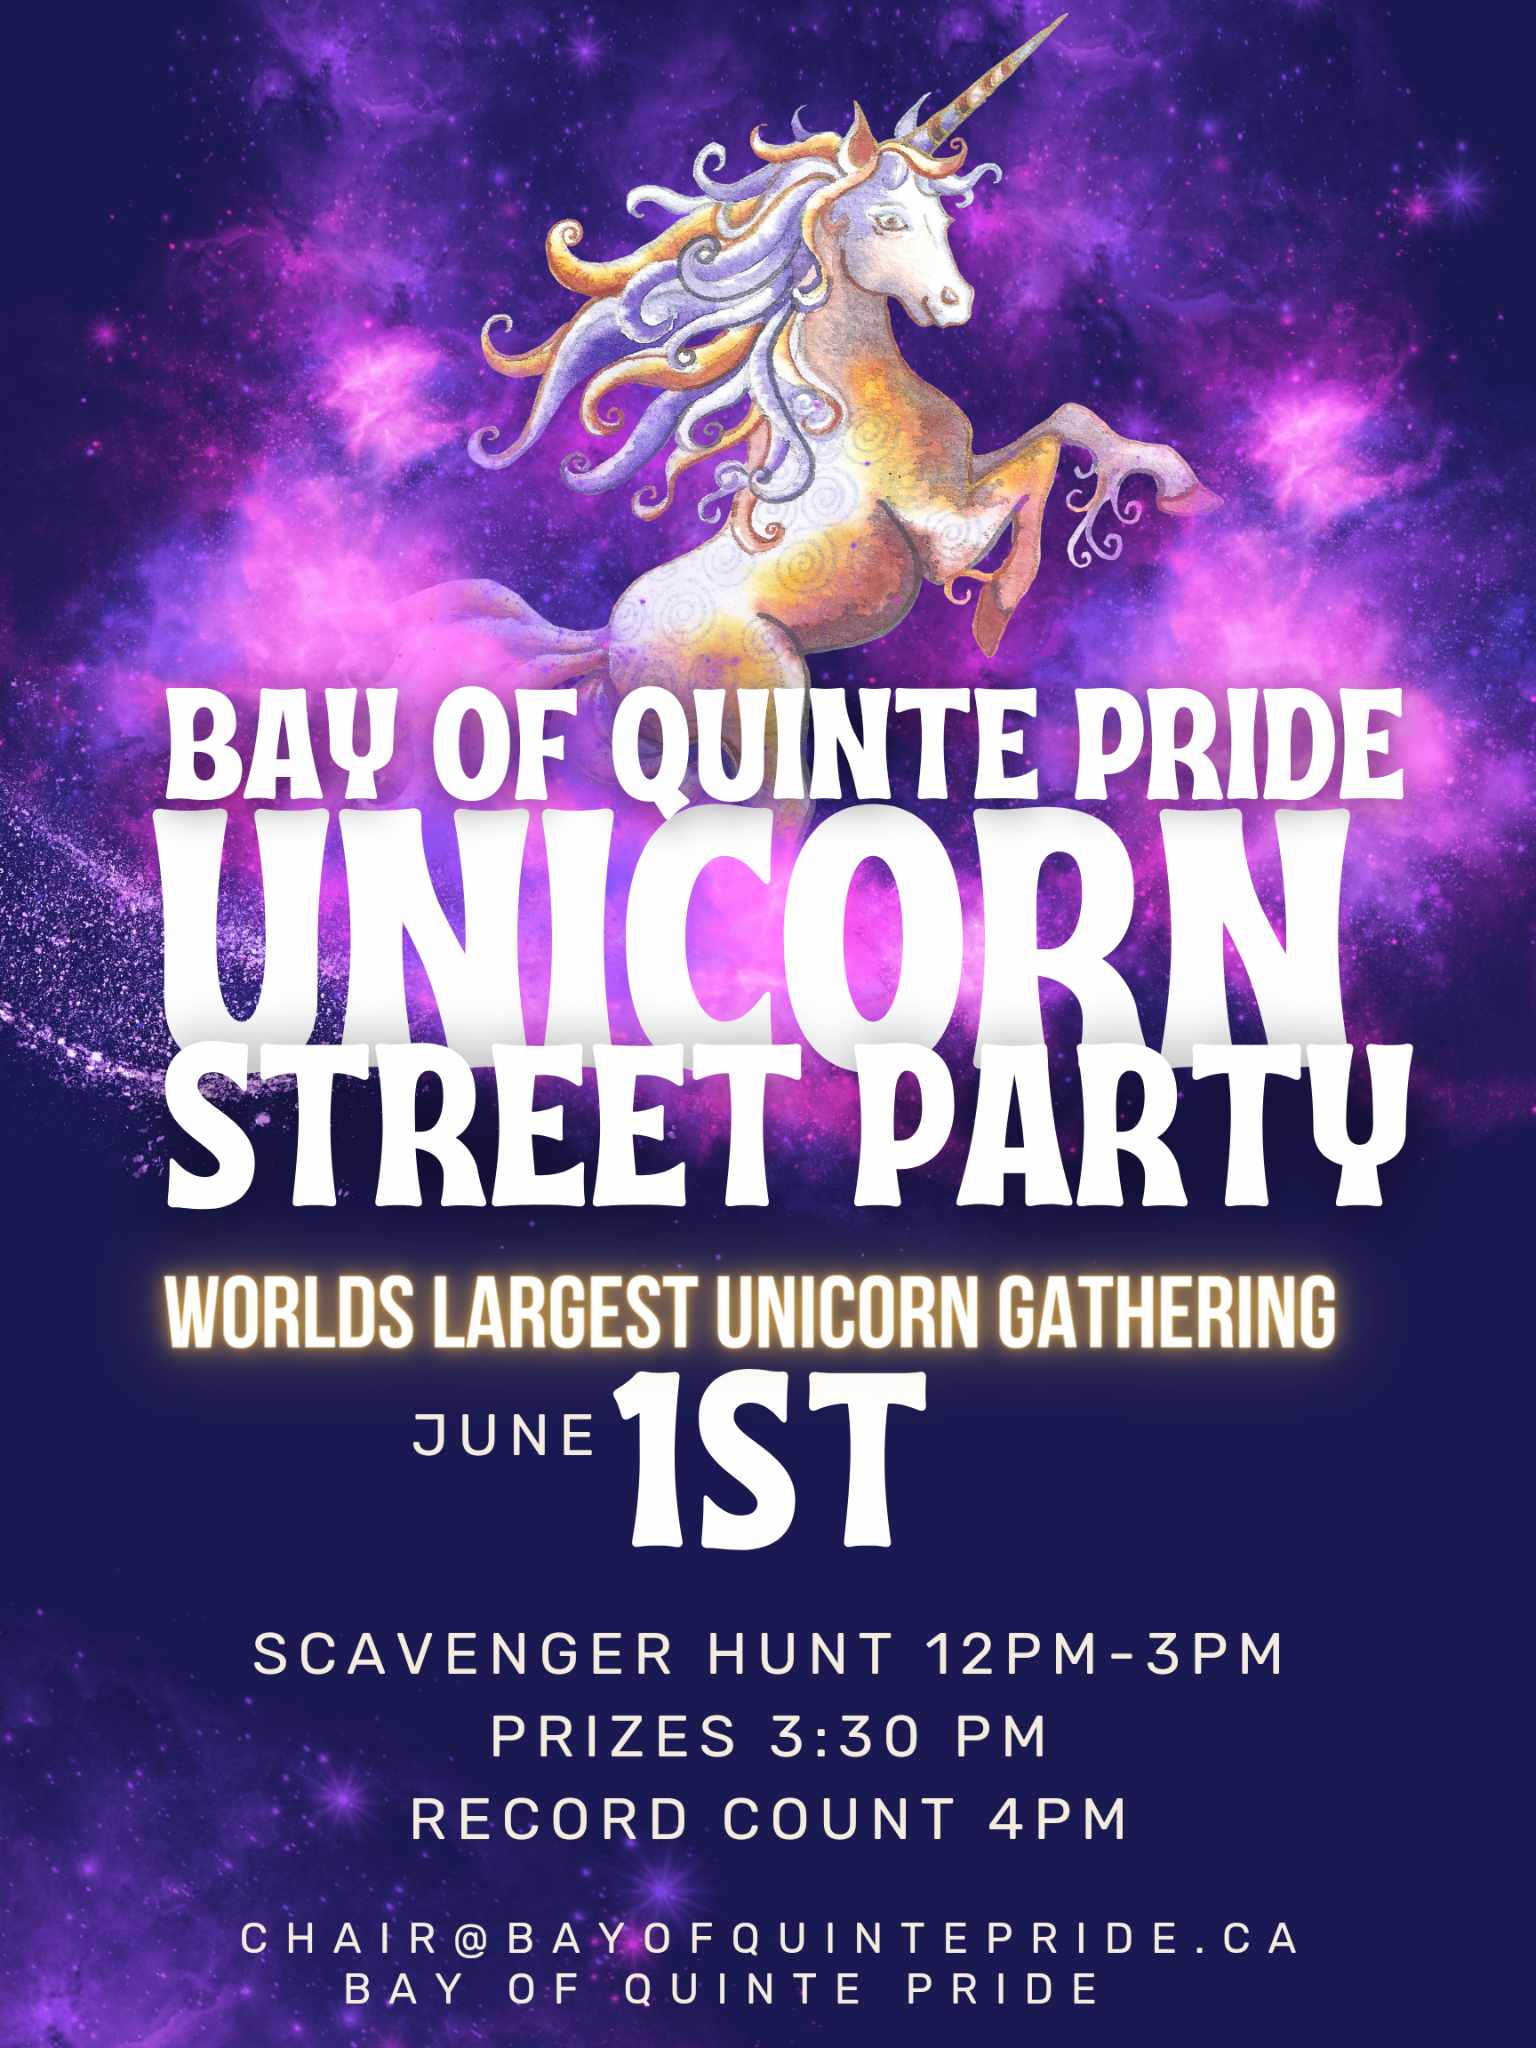 Poster with graphic of a unicorn and a purple fog background. Also, has event details.